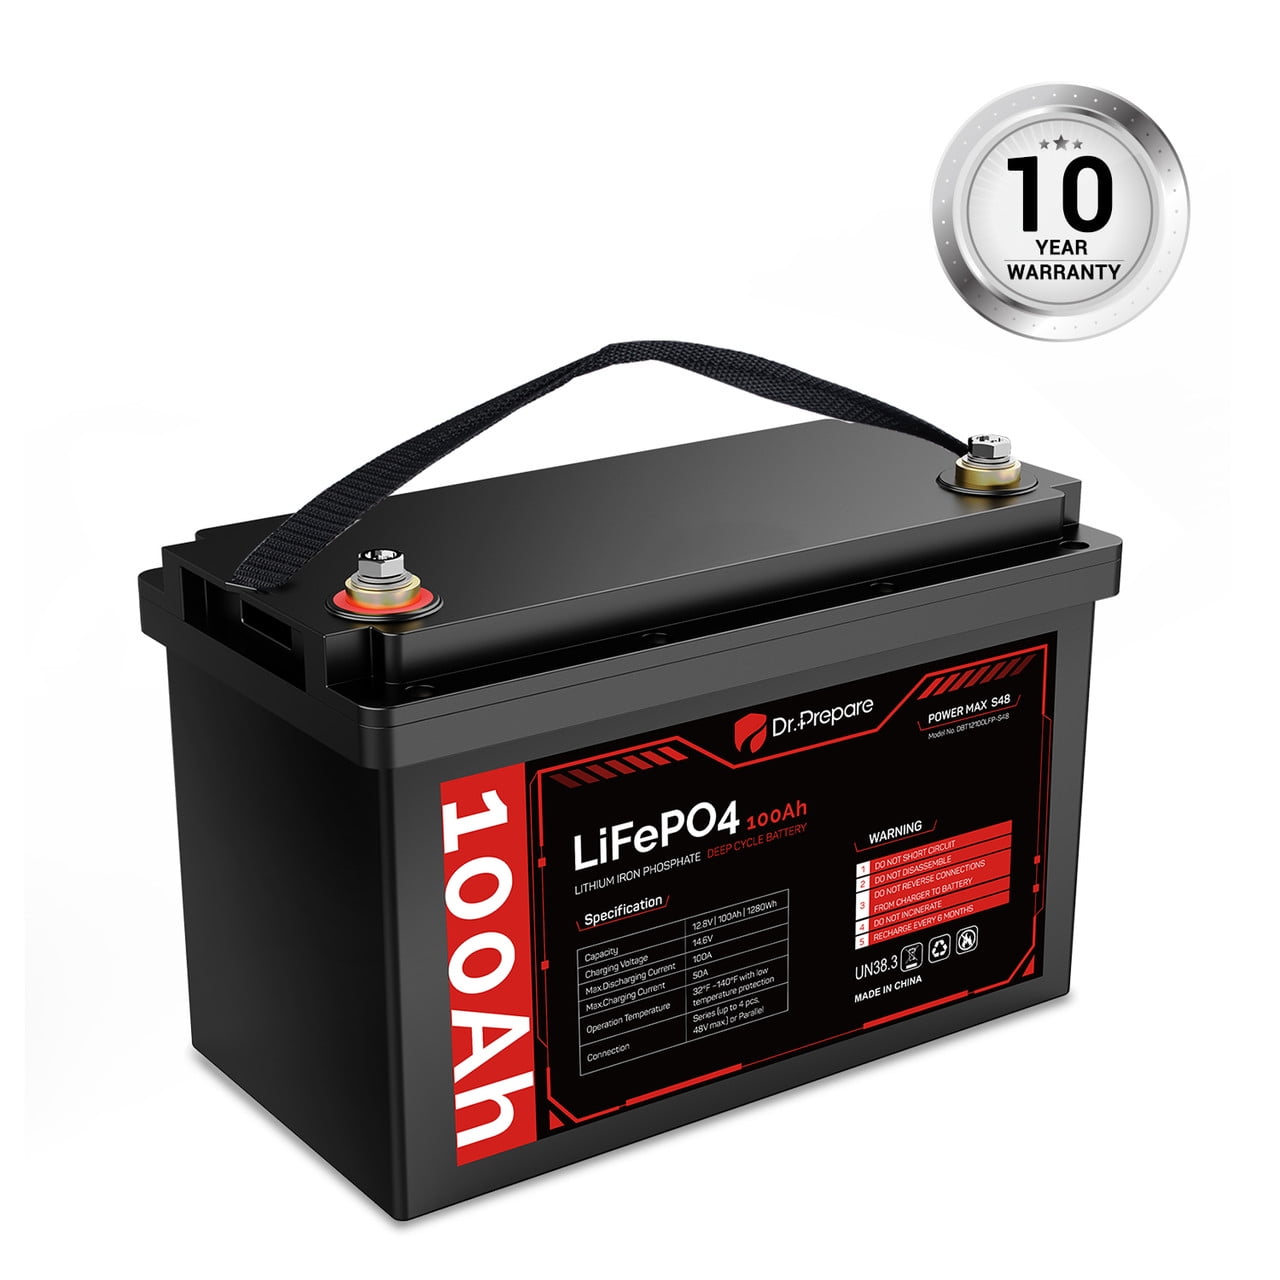 LiTime 12V 100Ah MINI LiFePO4 Lithium Battery, Upgraded Max. 1280Wh Energy  Small Size LiFePO4 Battery with Upgraded 100A BMS for RV, Camper, Solar,  Trolling Motor 